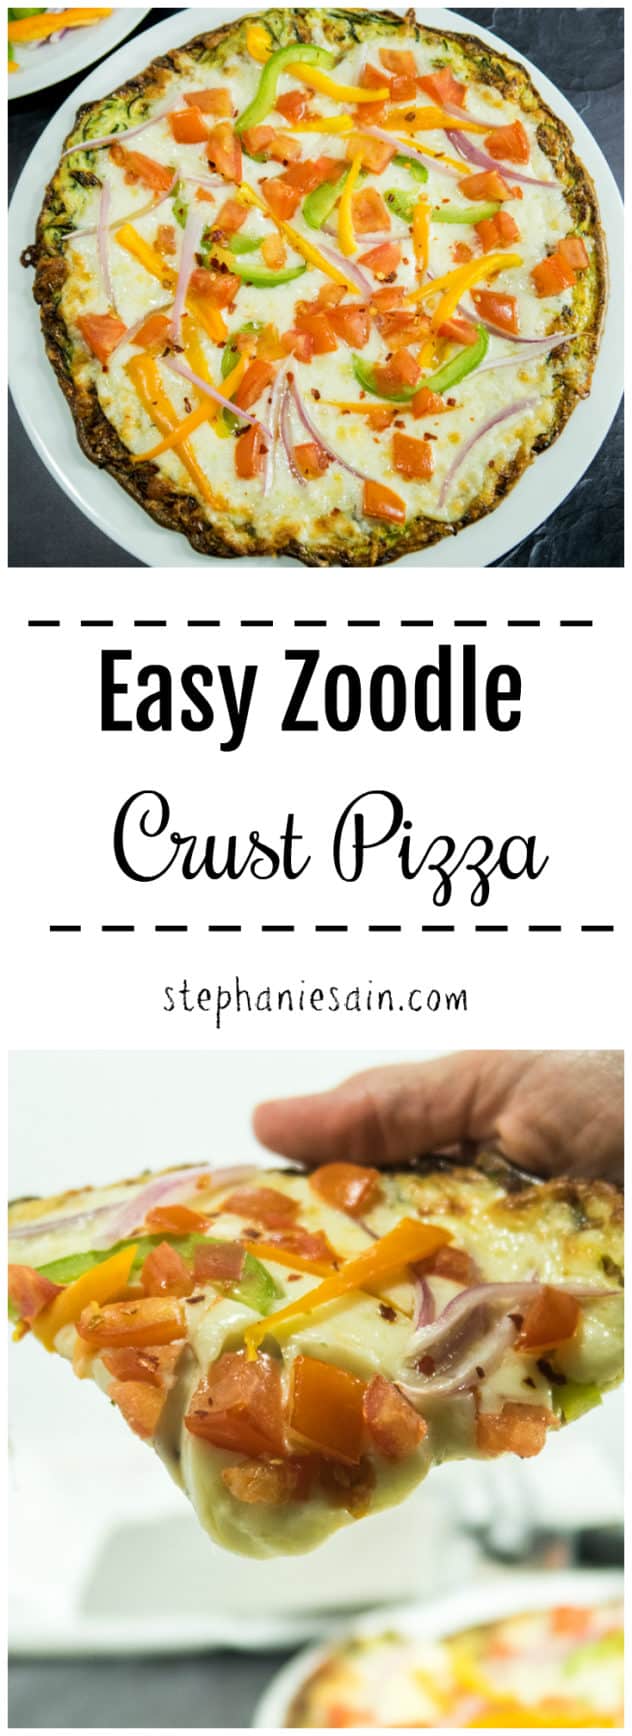 Easy Zoodle Crust Pizza is made with zucchini noodles and just a couple other ingredients. Great way to make a pizza crust with zucchini. Low carb, gluten free crust that can be topped with all of your favorite pizza toppings.